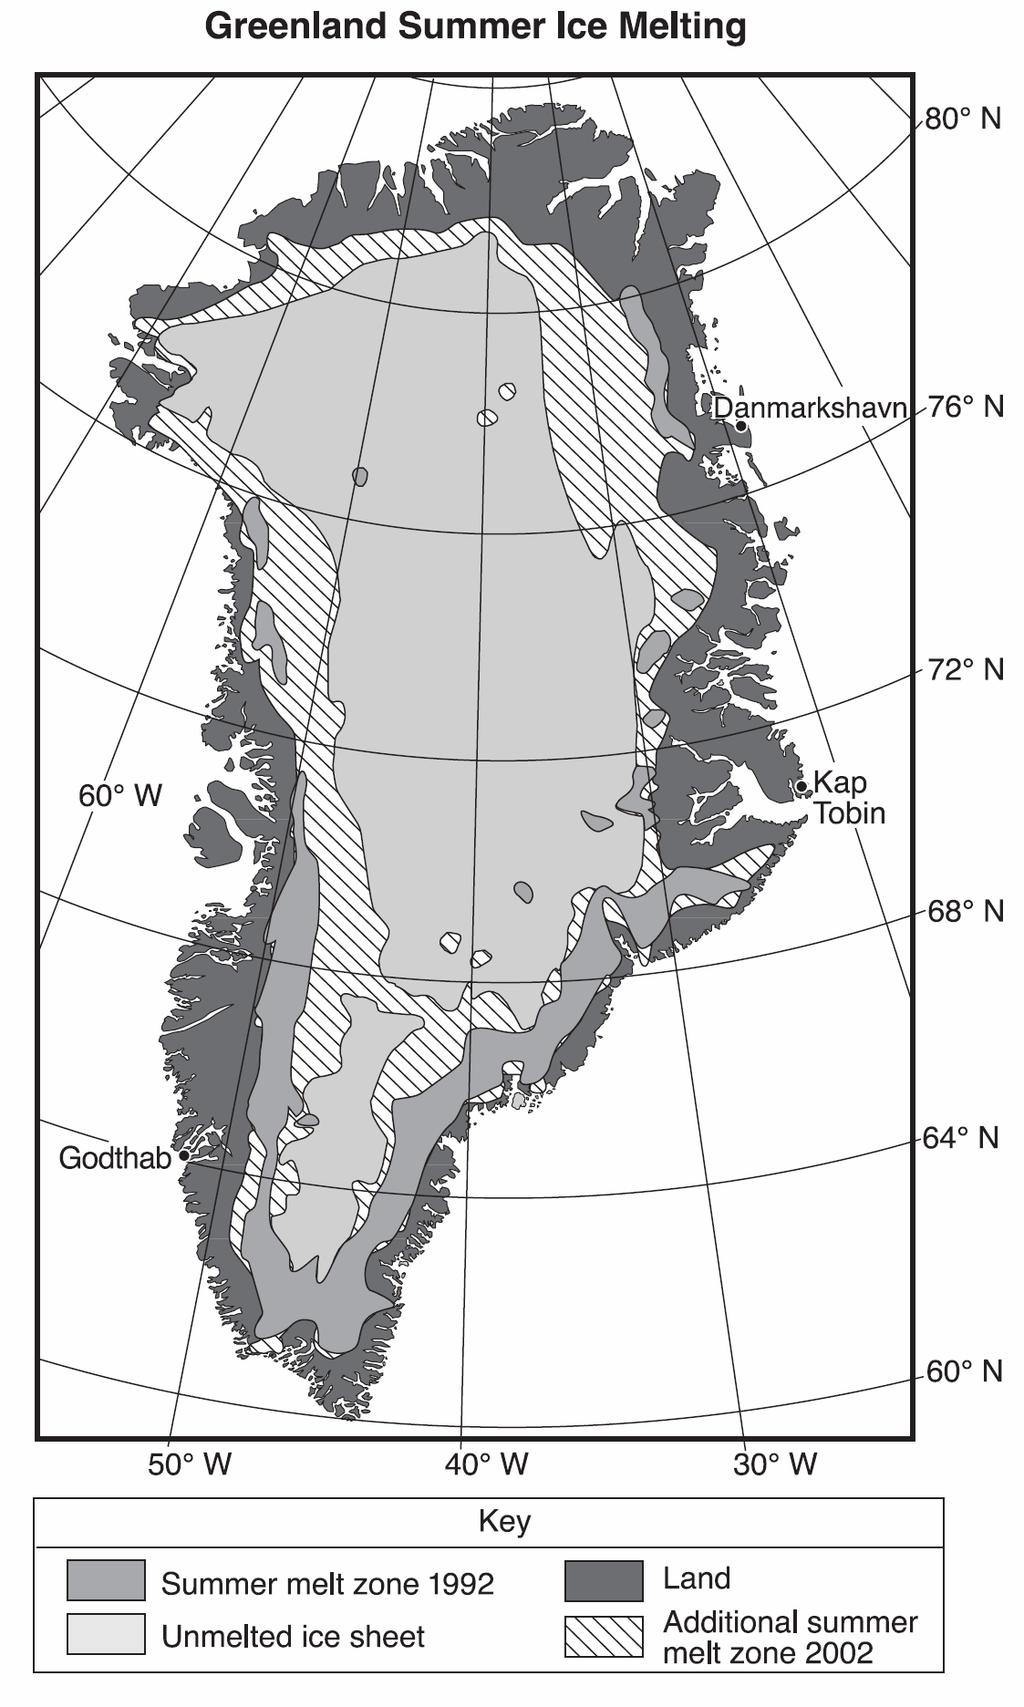 22. Base your answer to the following question on the following map and passage. The map shows the extent of summer ice-melt zones on Greenland in 1992 and 2002.